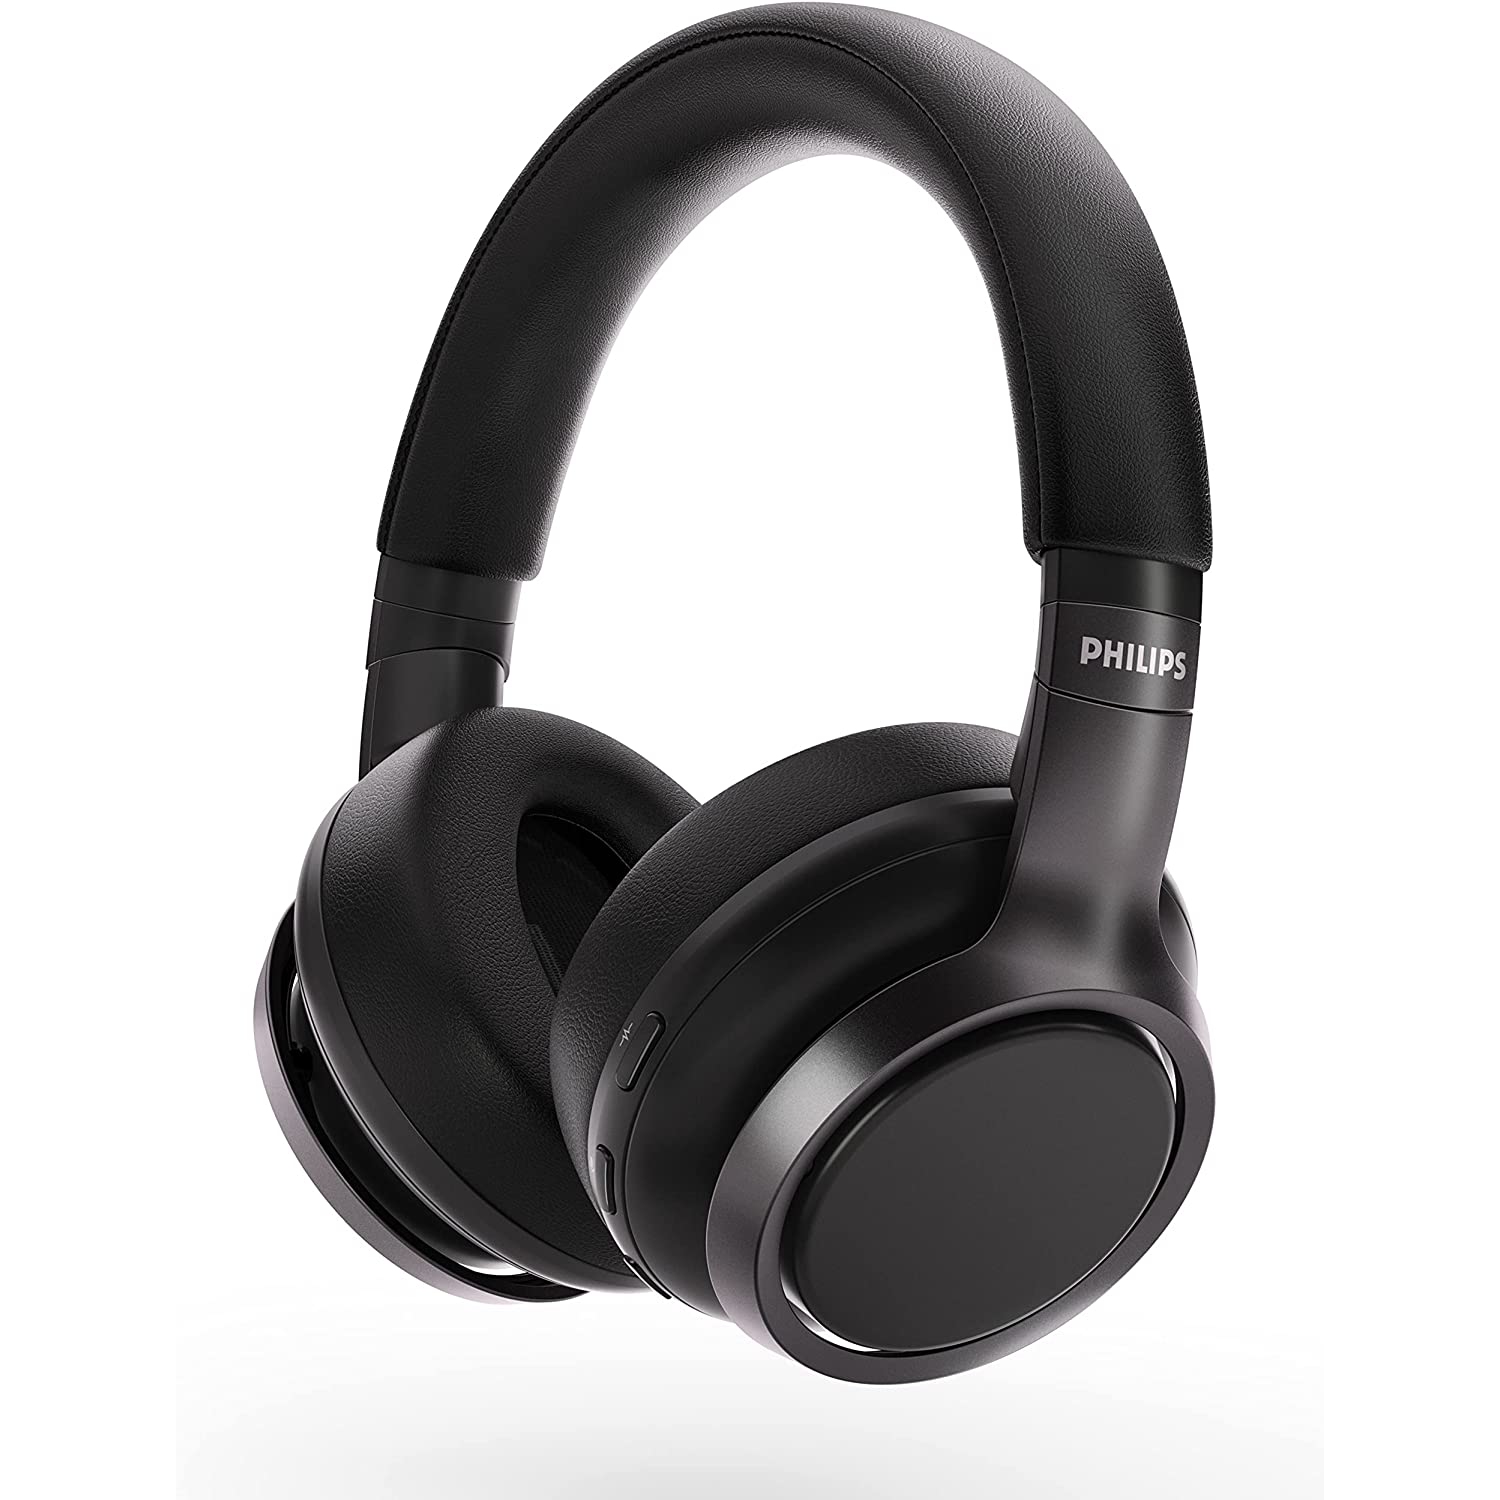 Philips Hybrid Active Noise Cancelling, Bluetooth, Over-Ear Headphones. 40mm Dri